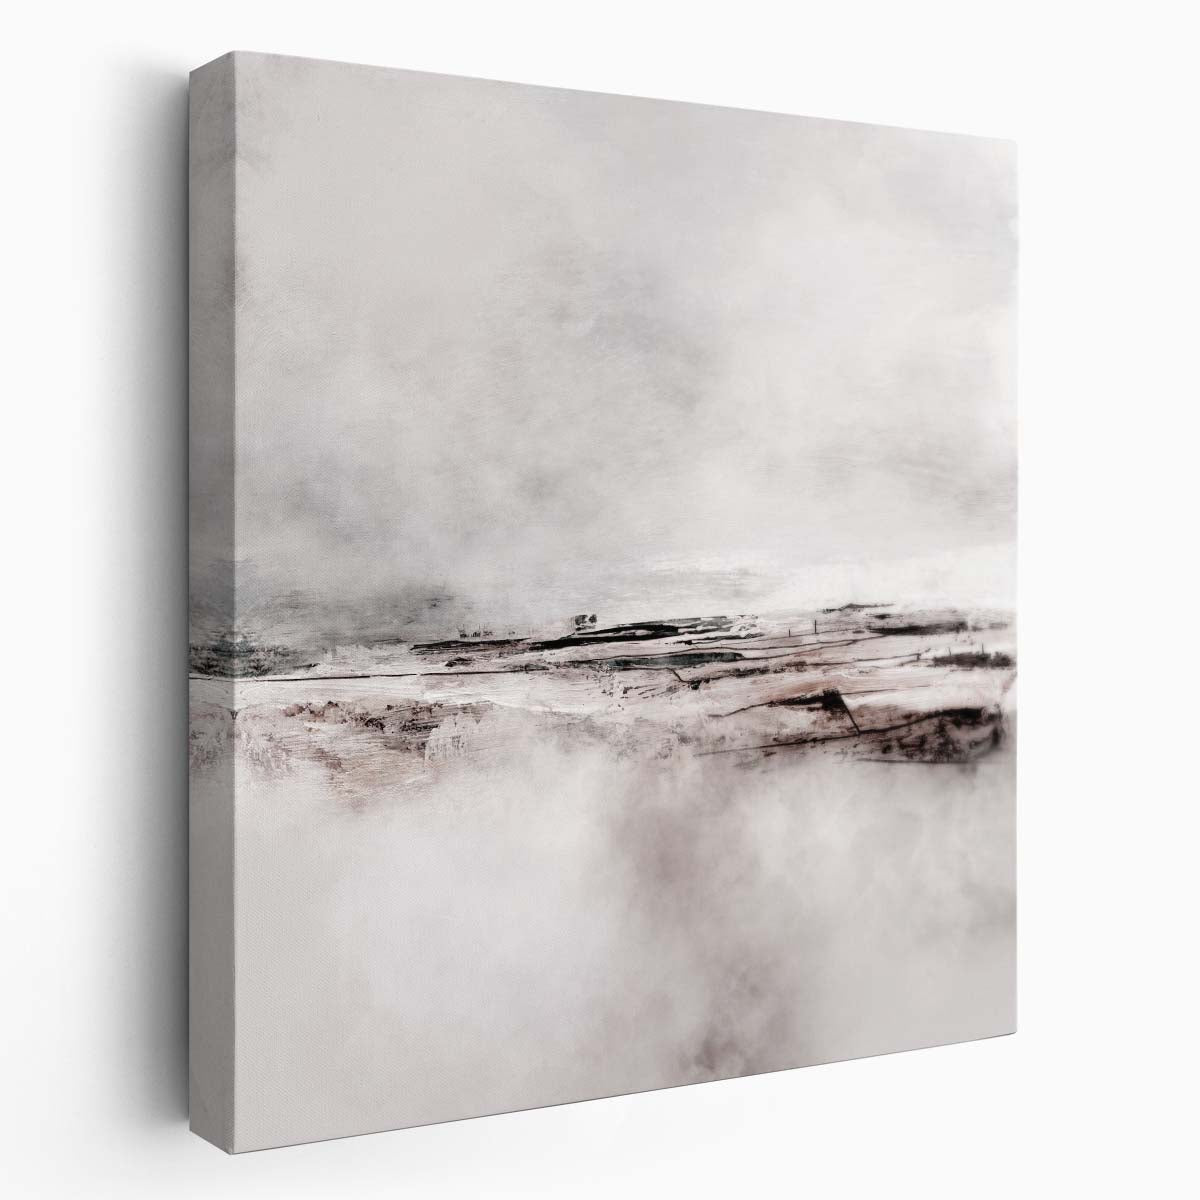 Modern Minimalist Abstract Landscape by Dan Hobday Wall Art by Luxuriance Designs. Made in USA.